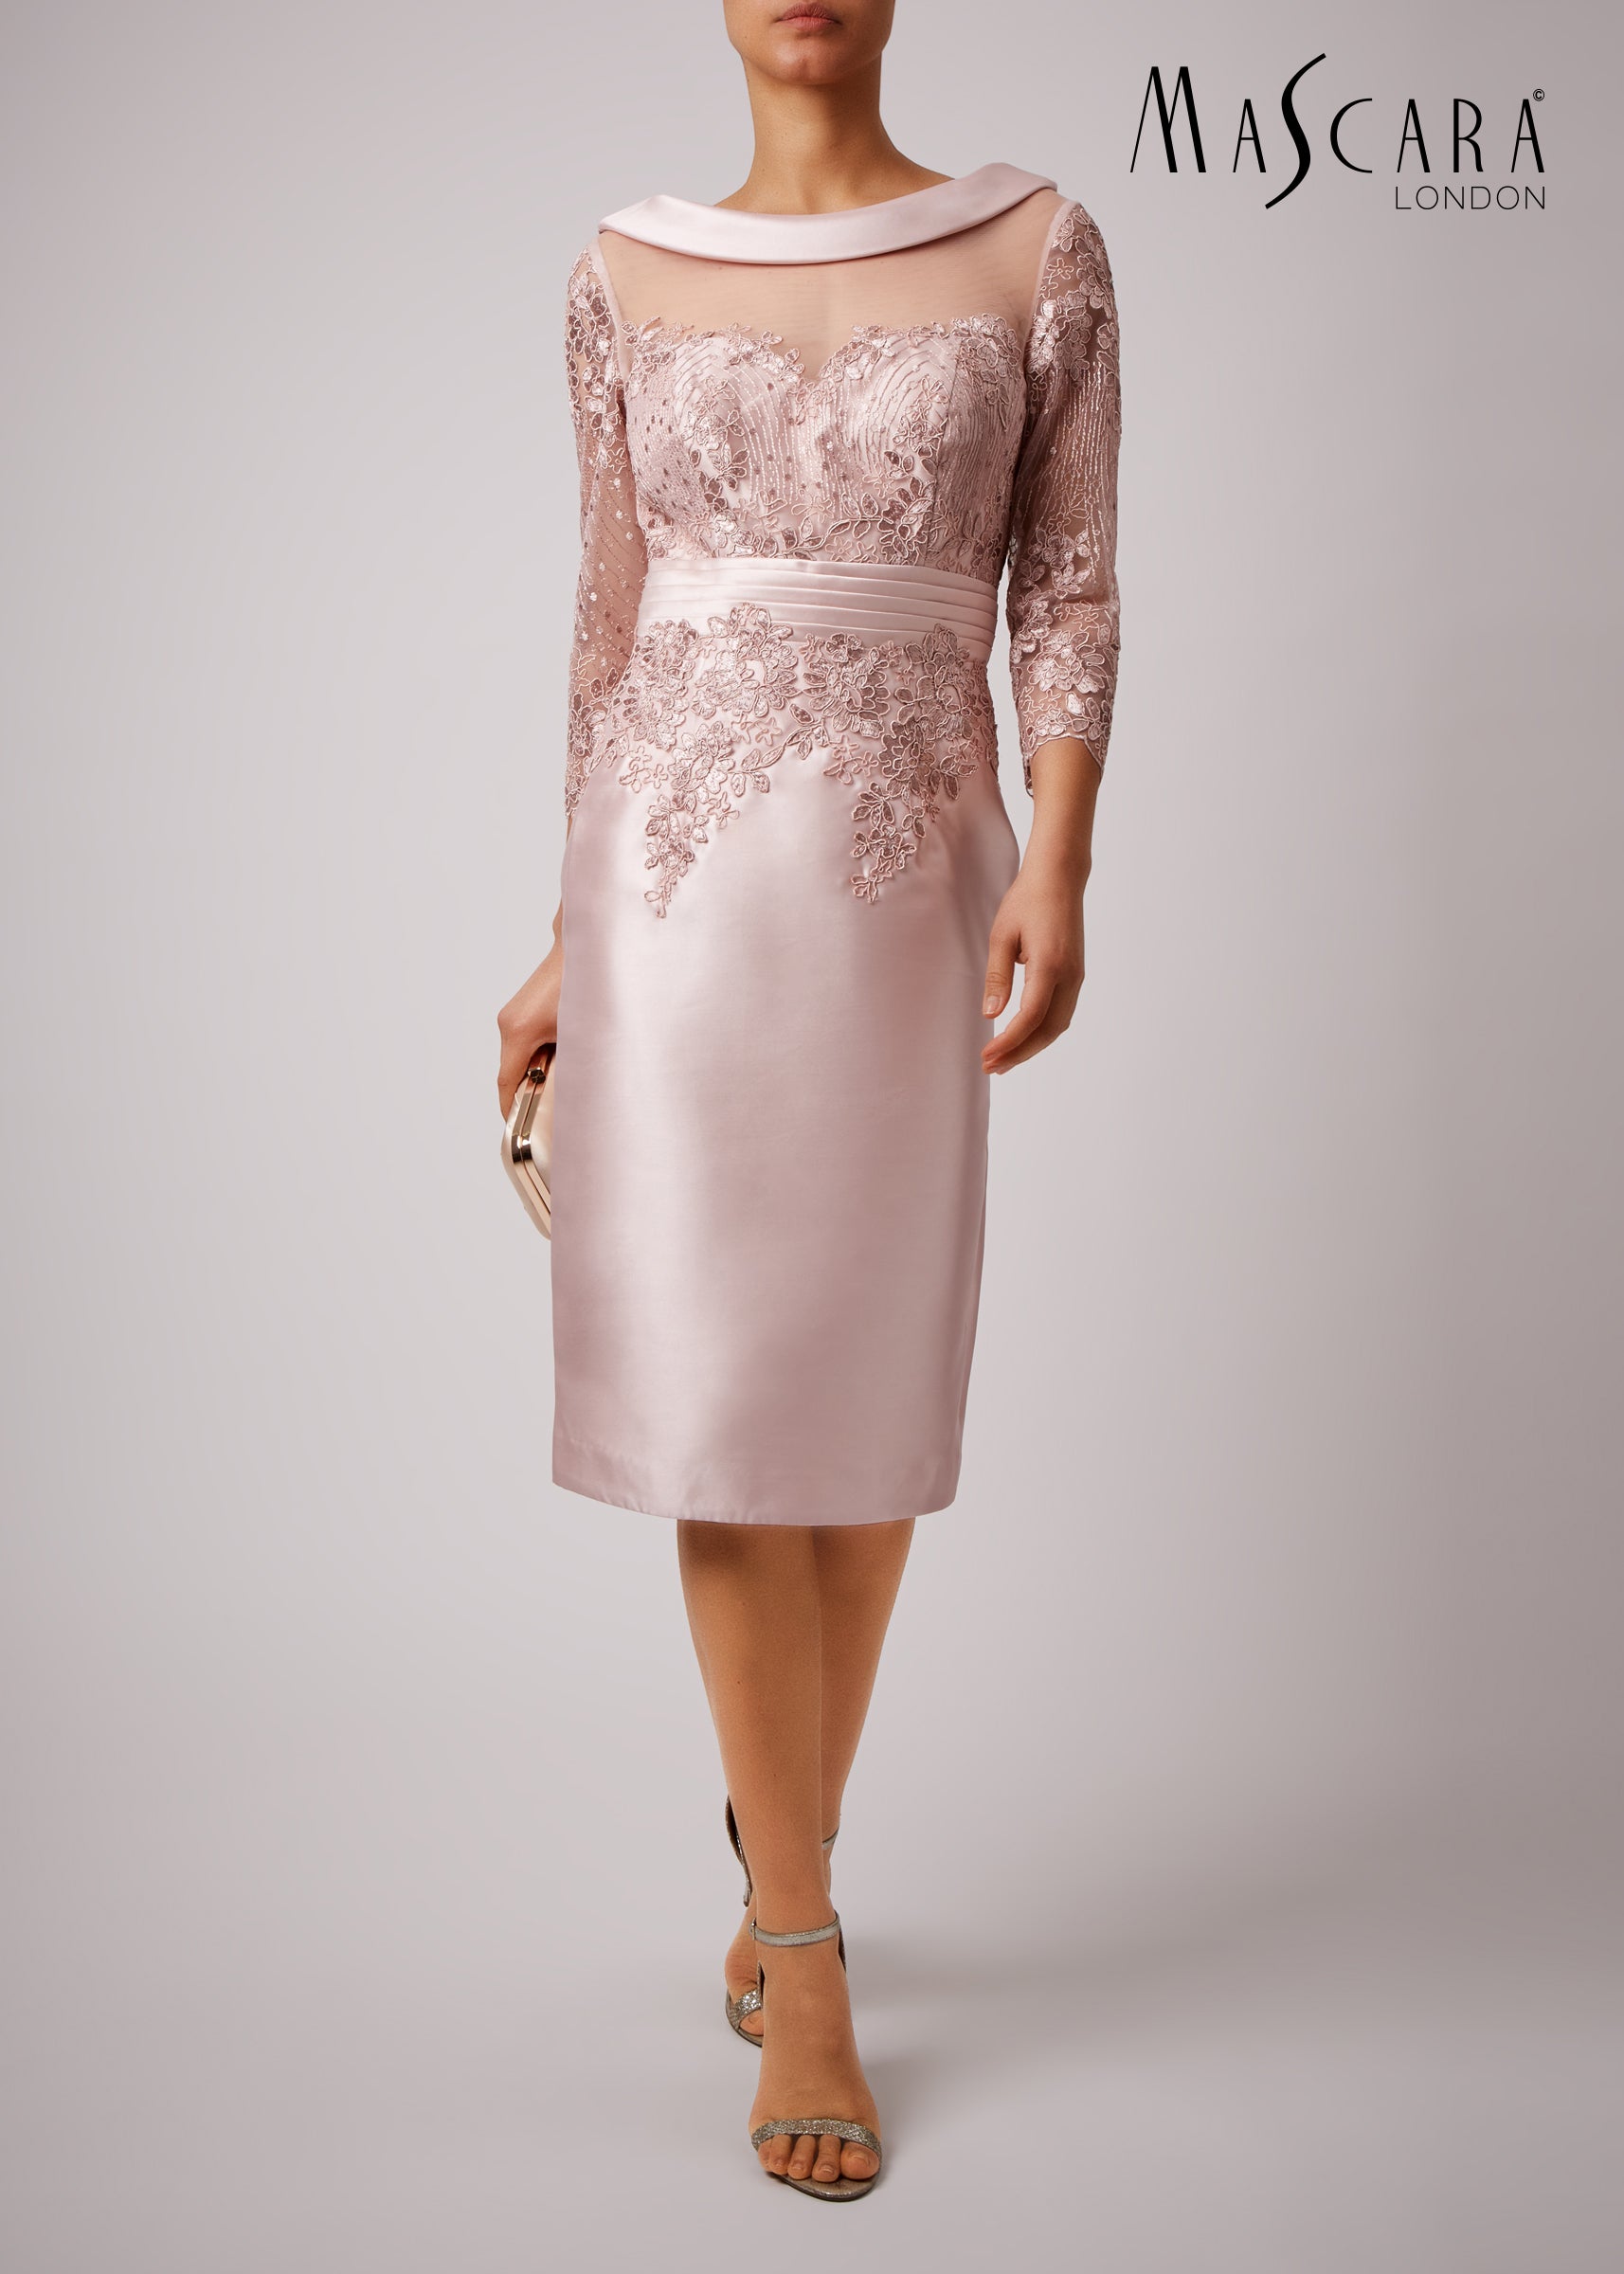 Blush pink fitted mother of the bride dress